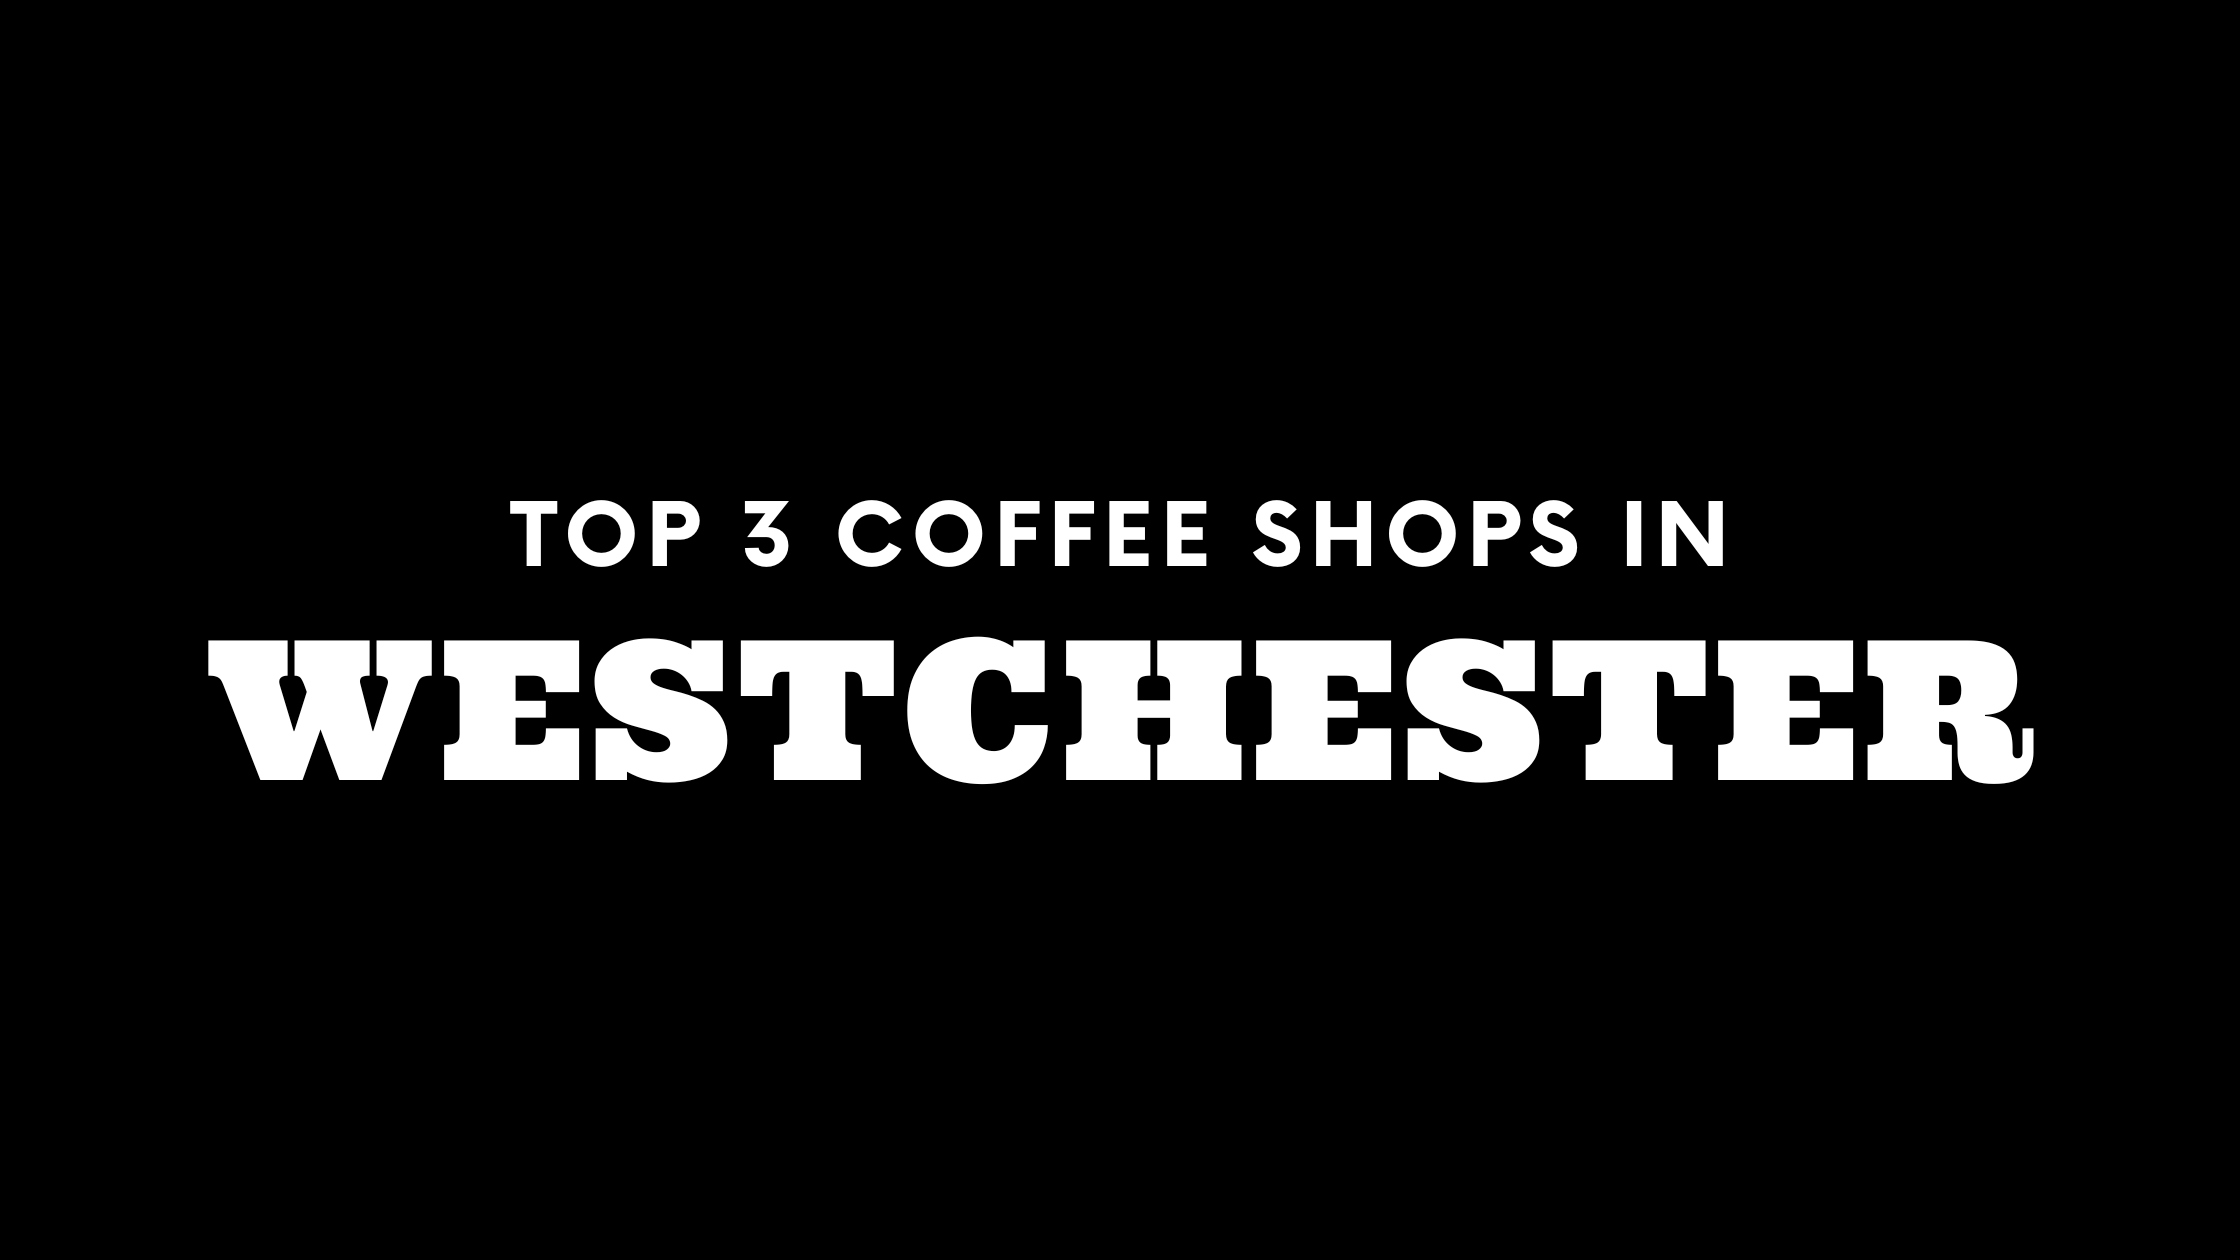 Top 3 Coffee Shops in Westchester